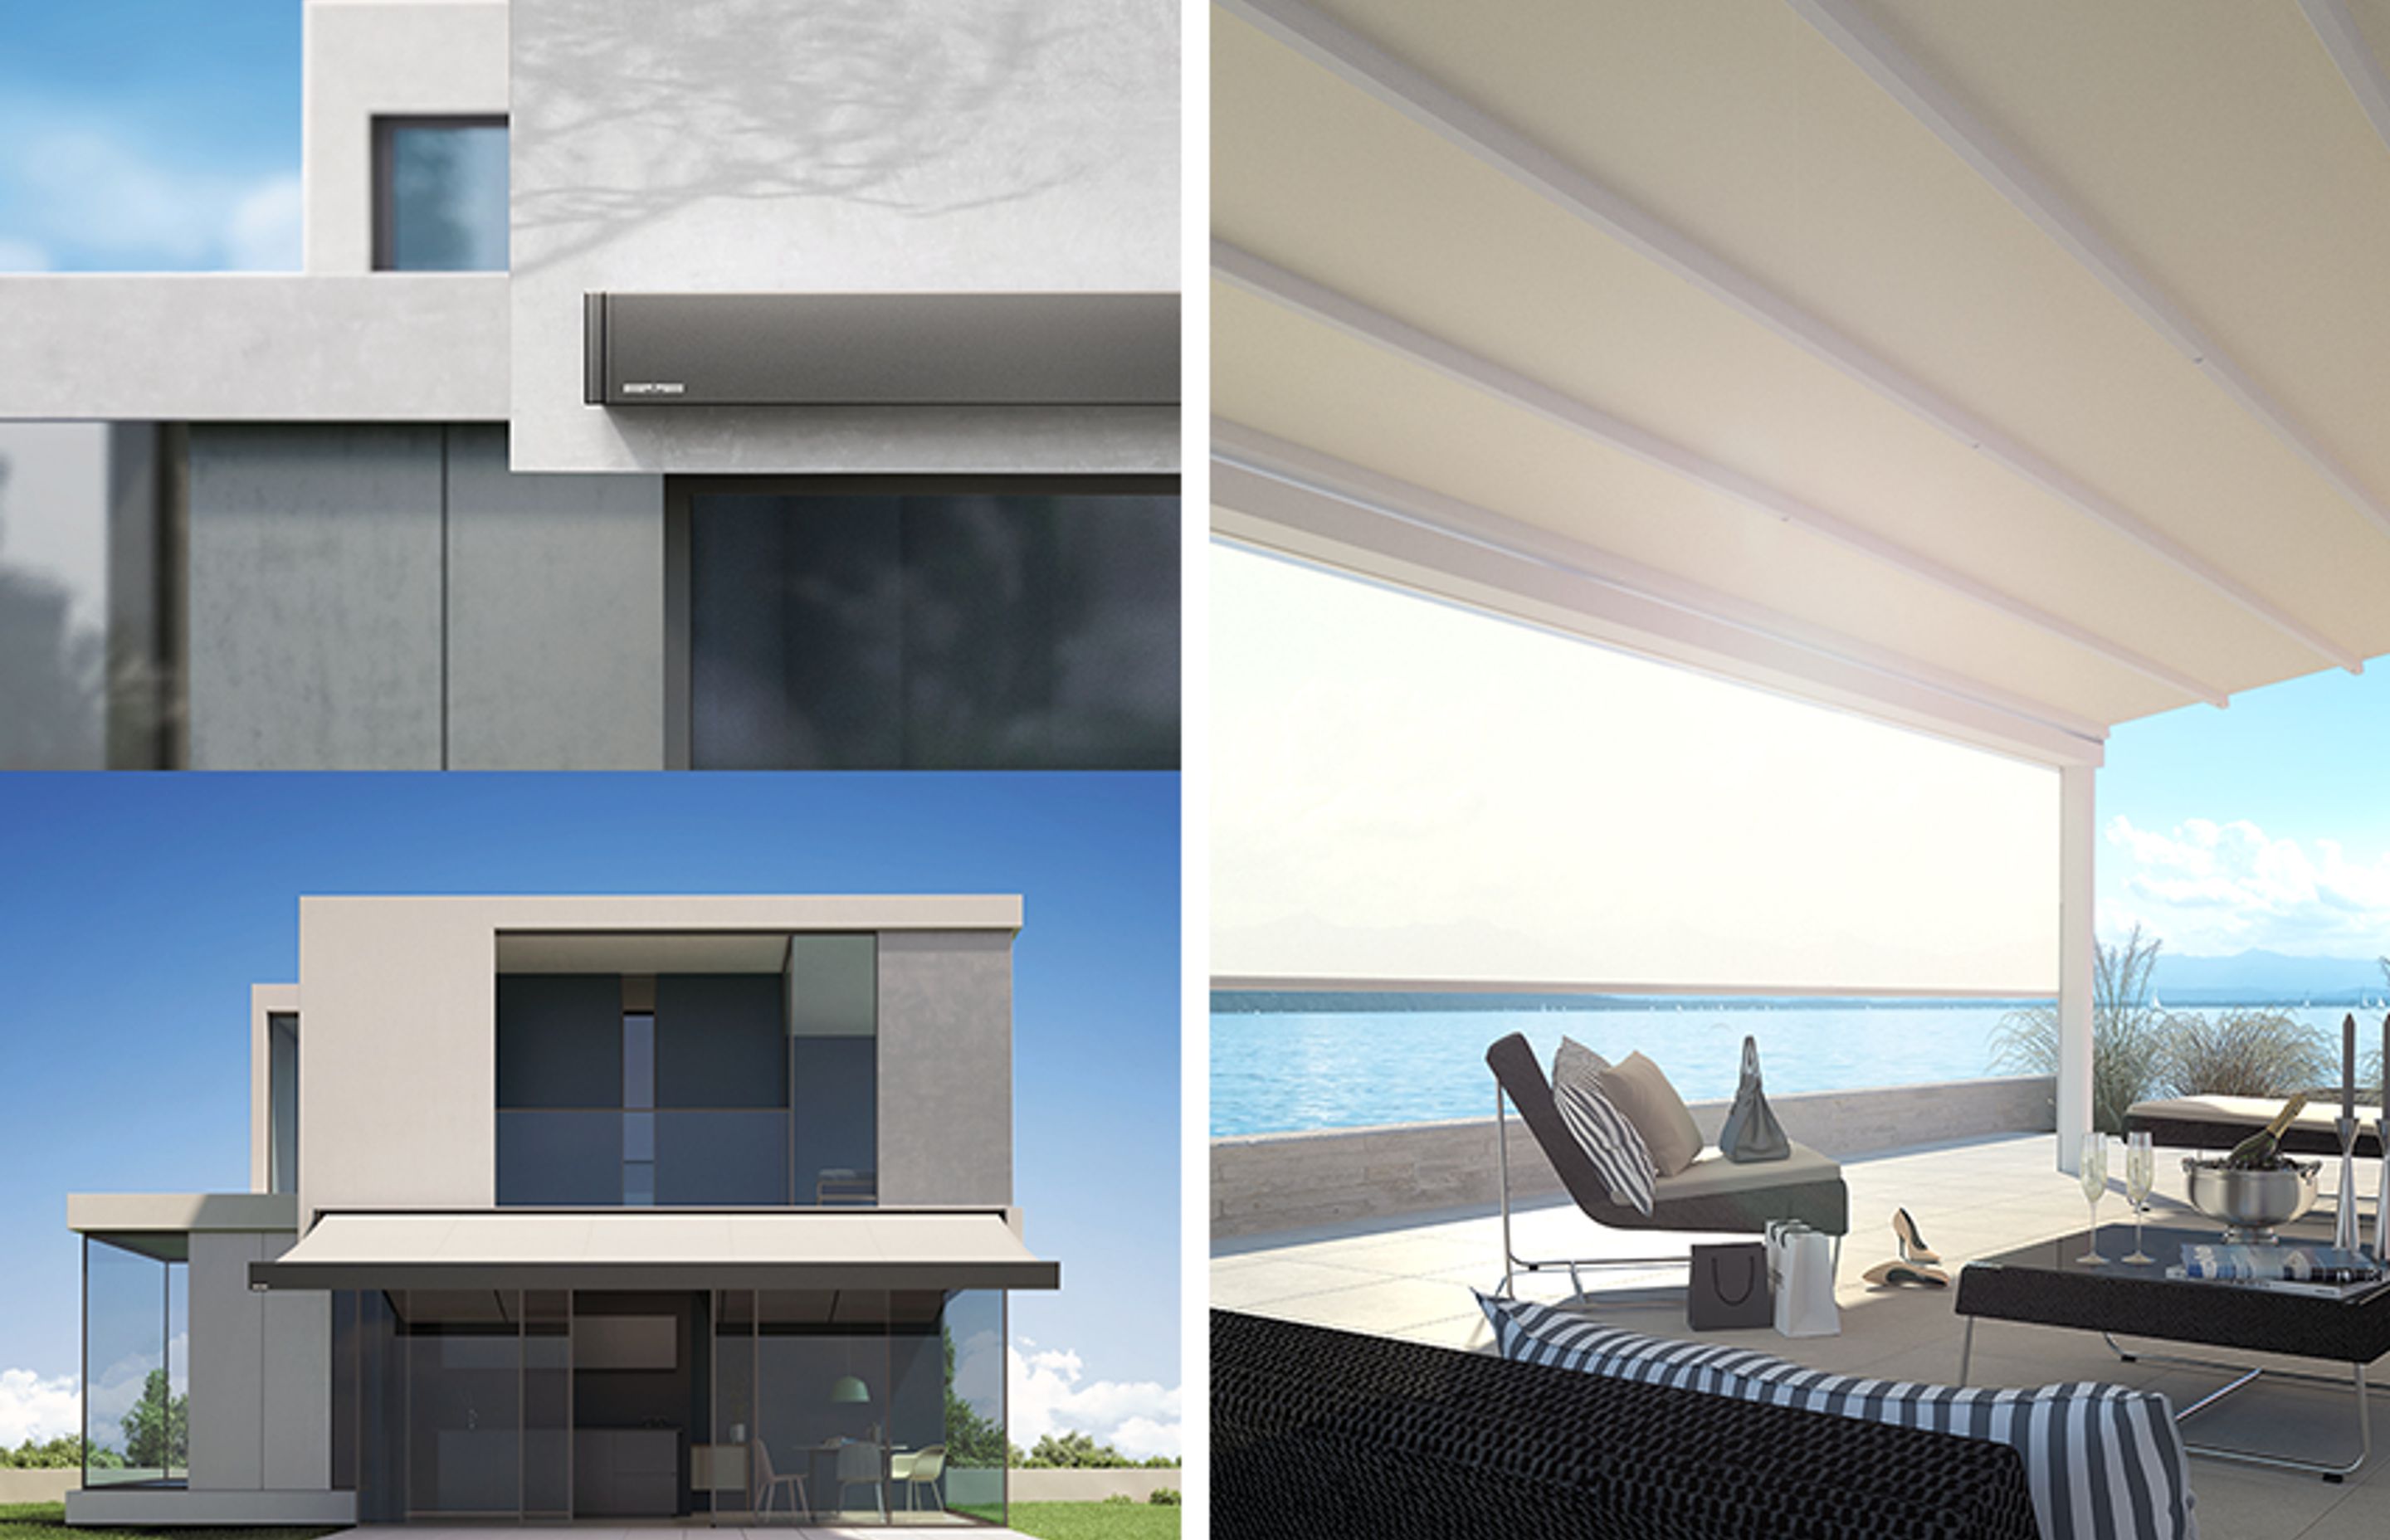 With its cubic form, Kubata (left) blends perfectly with modern architecture as a stylish design element. The Cabrio-Folding System of PergoTex II (right) is rain-proof, wind stable and completely retractable. Here, it's been teamed with the VertiTex vert